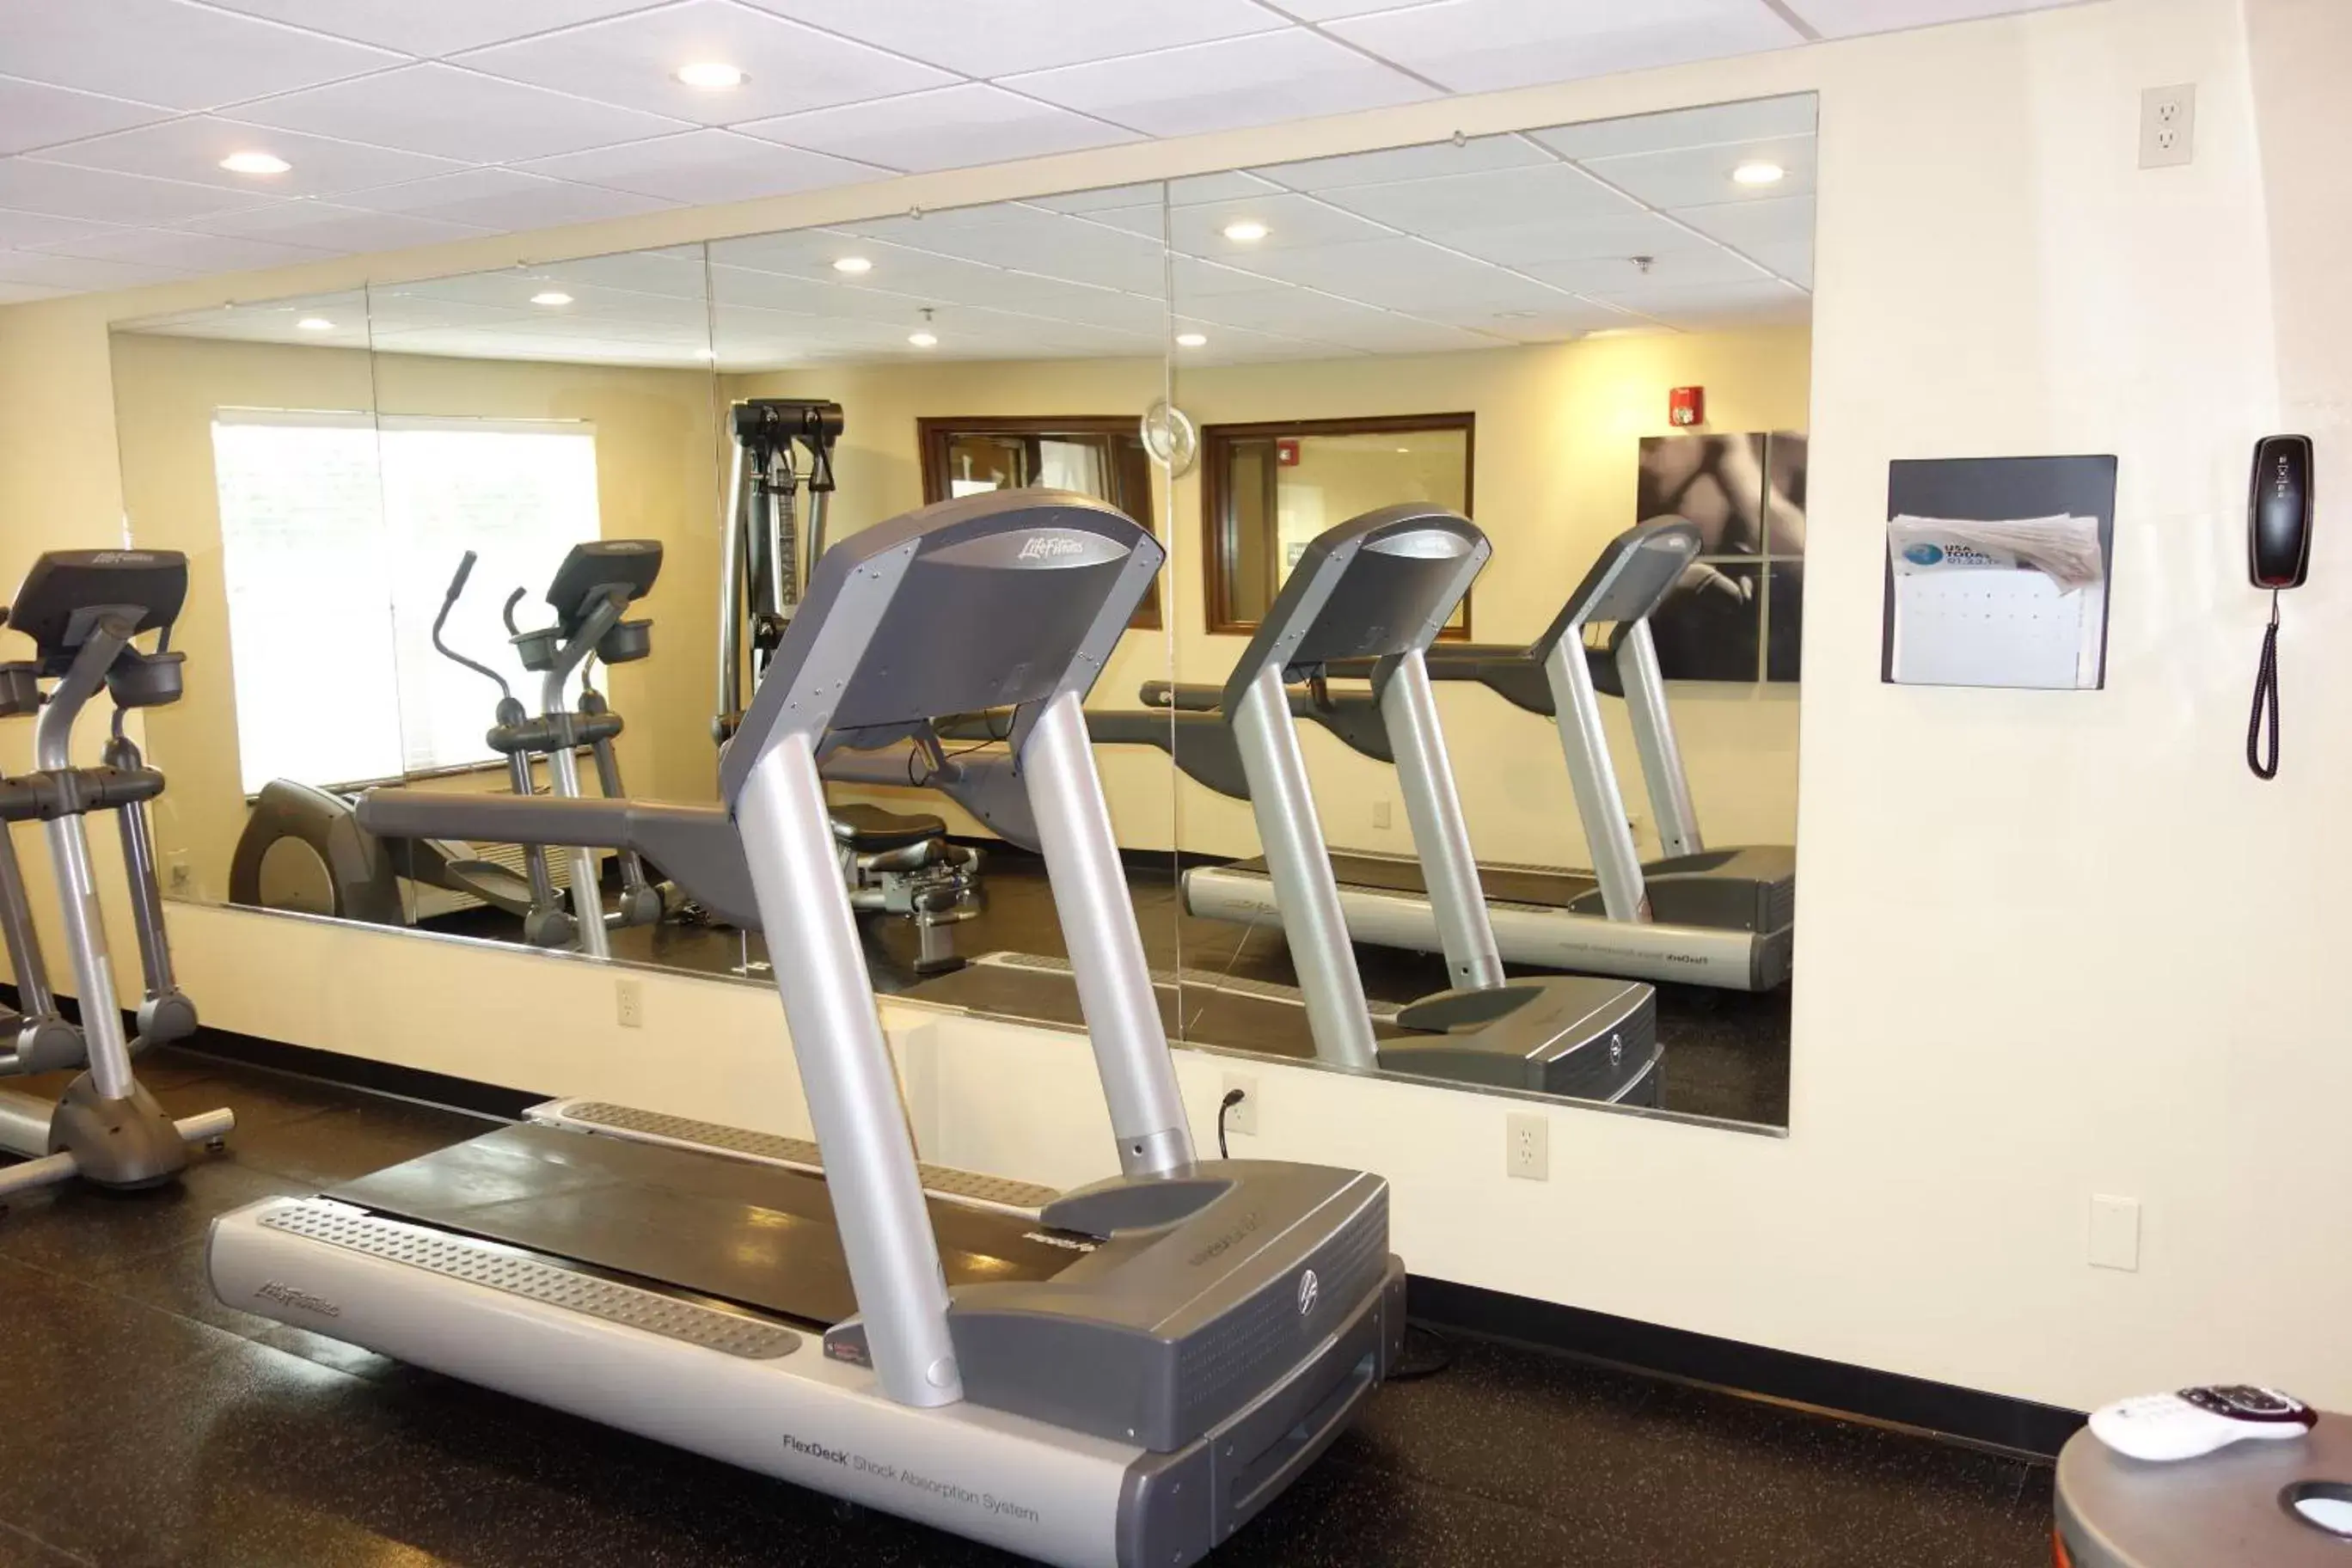 Fitness centre/facilities, Fitness Center/Facilities in Country Inn & Suites by Radisson, Rome, GA